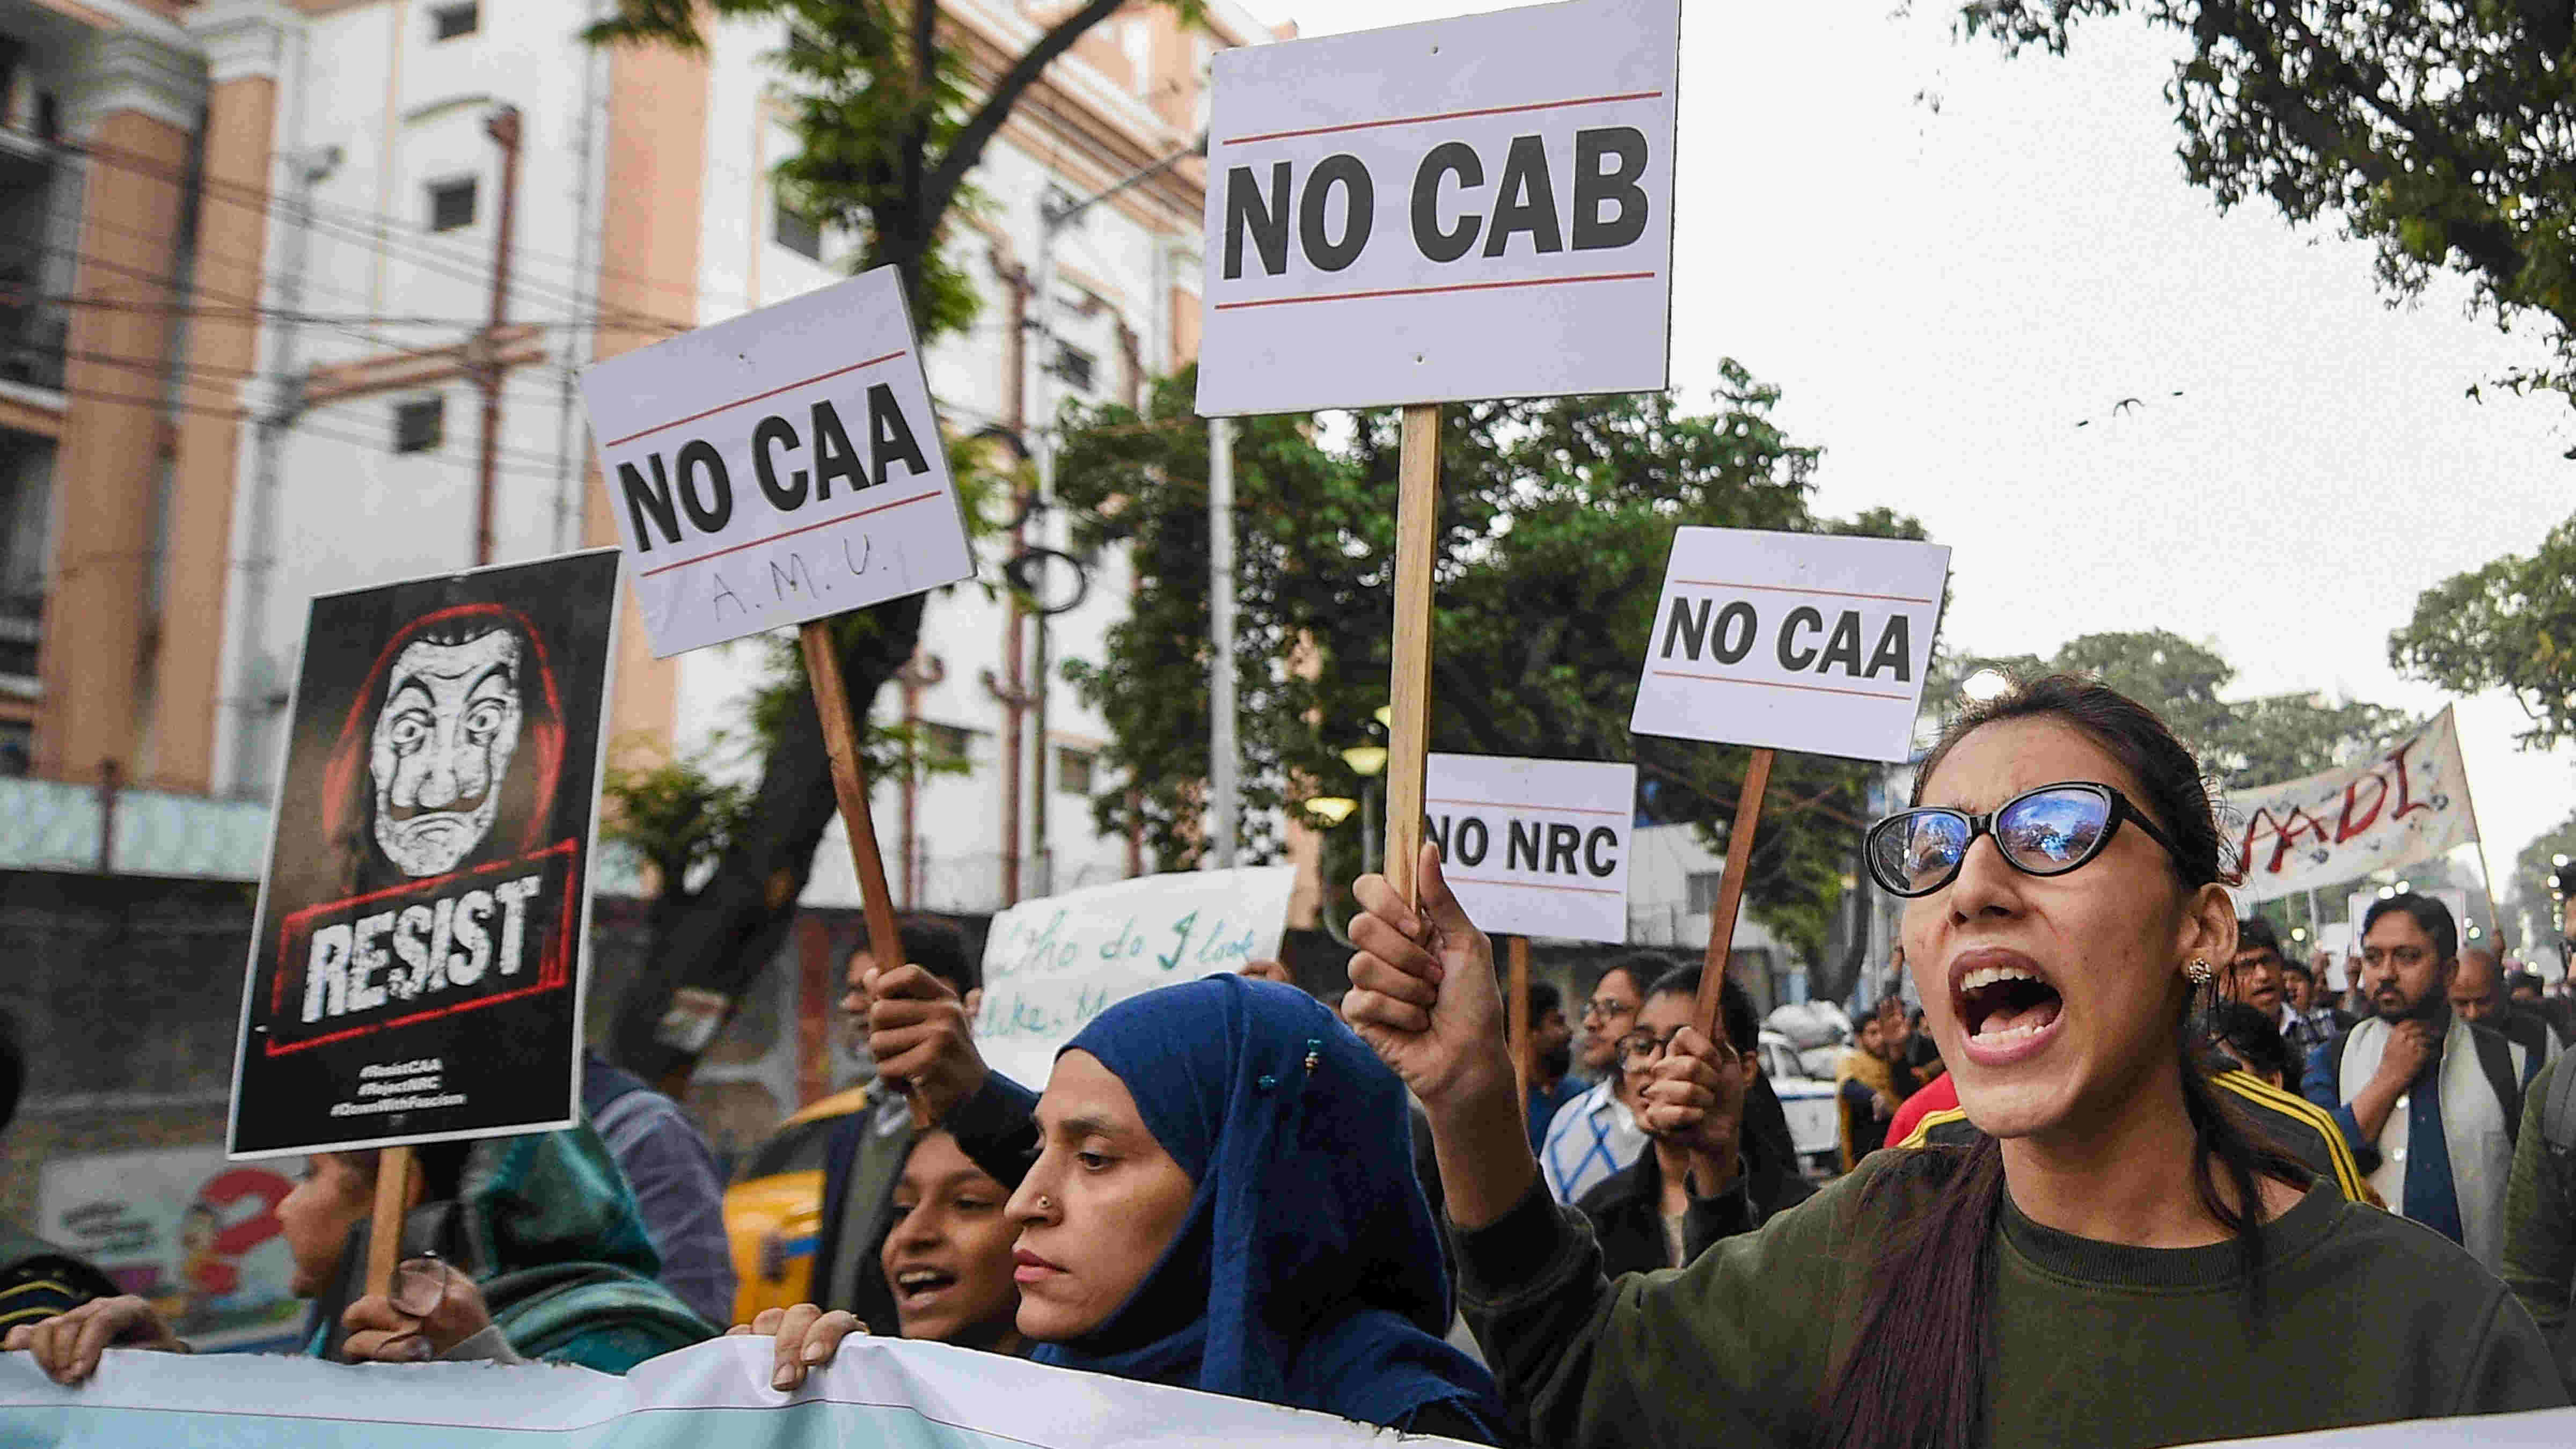 Students take part in a rally protest against CAA, NRC, in Kolkata, Friday, December 20, 2019.